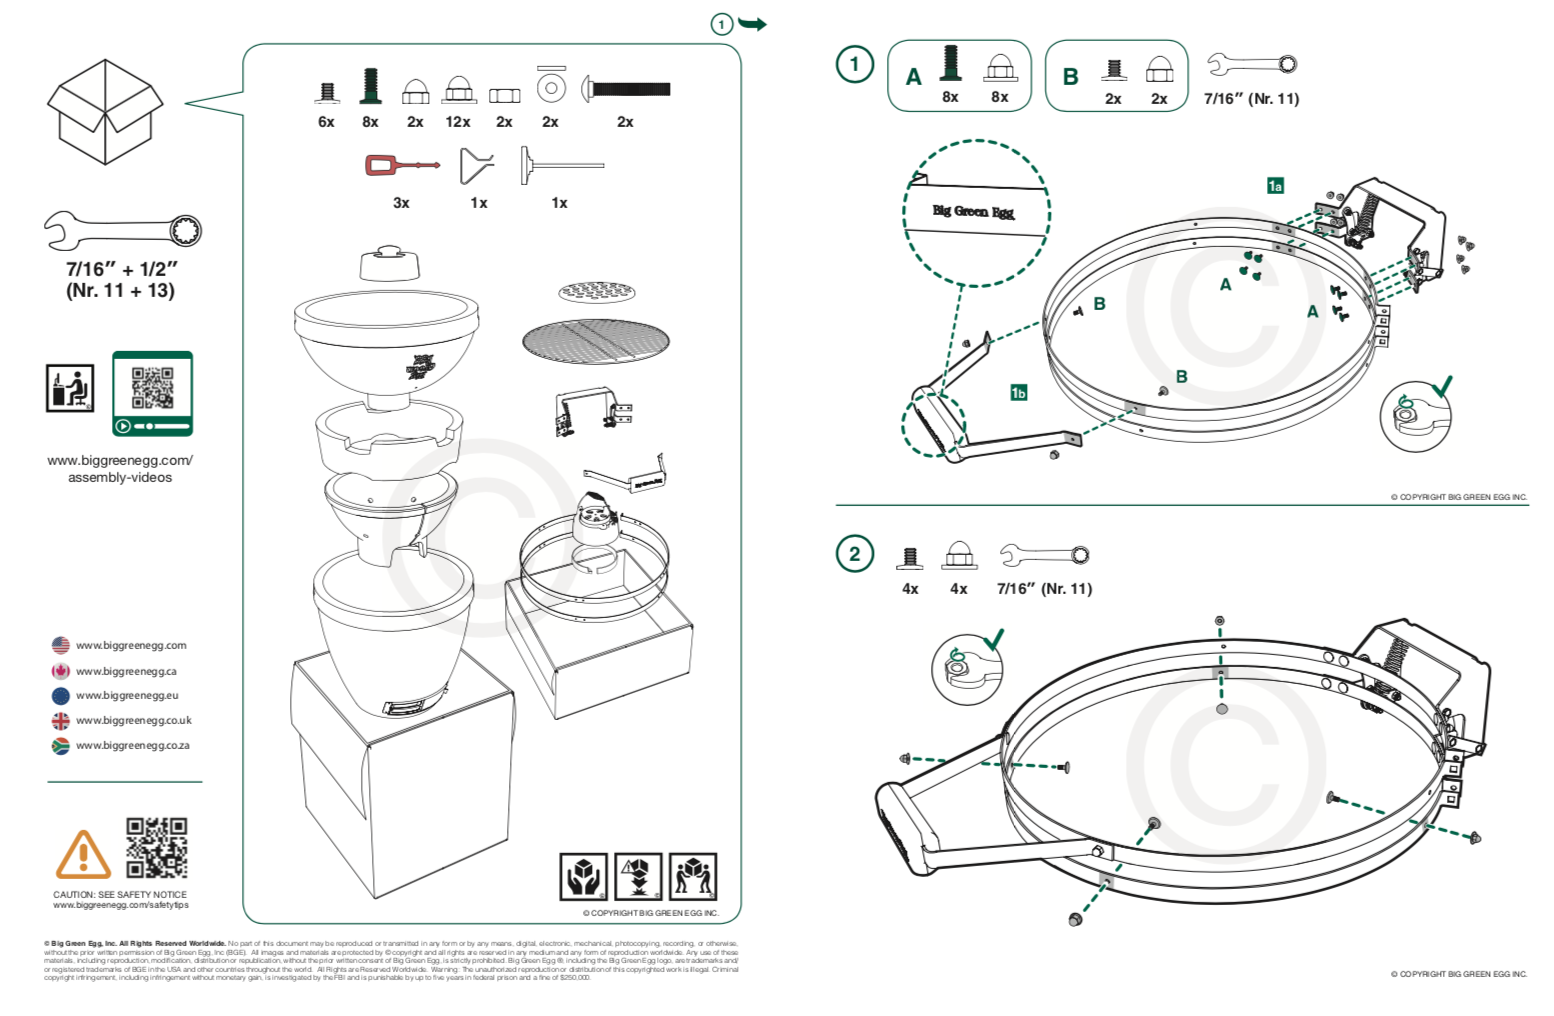 A quick start guide explaining the assembly of a Green Egg cooker